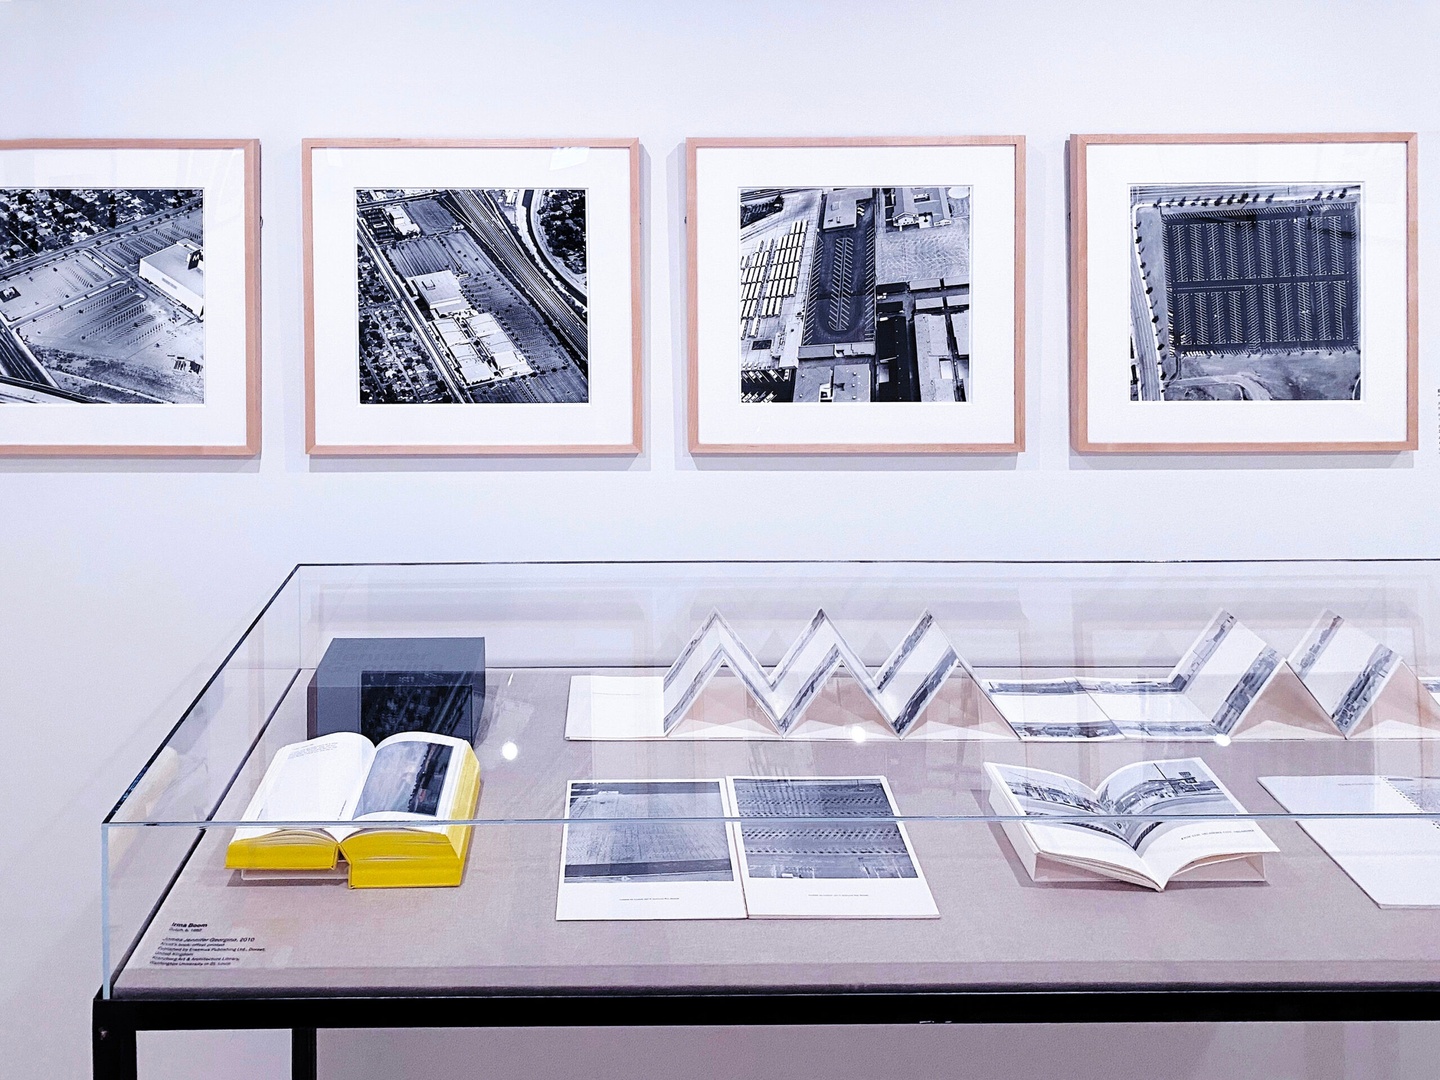 In a museum exhibition, four framed black and white images are hung on the wall. Below them is a table with a glass case. Inside, several books containing black and white images lay open.